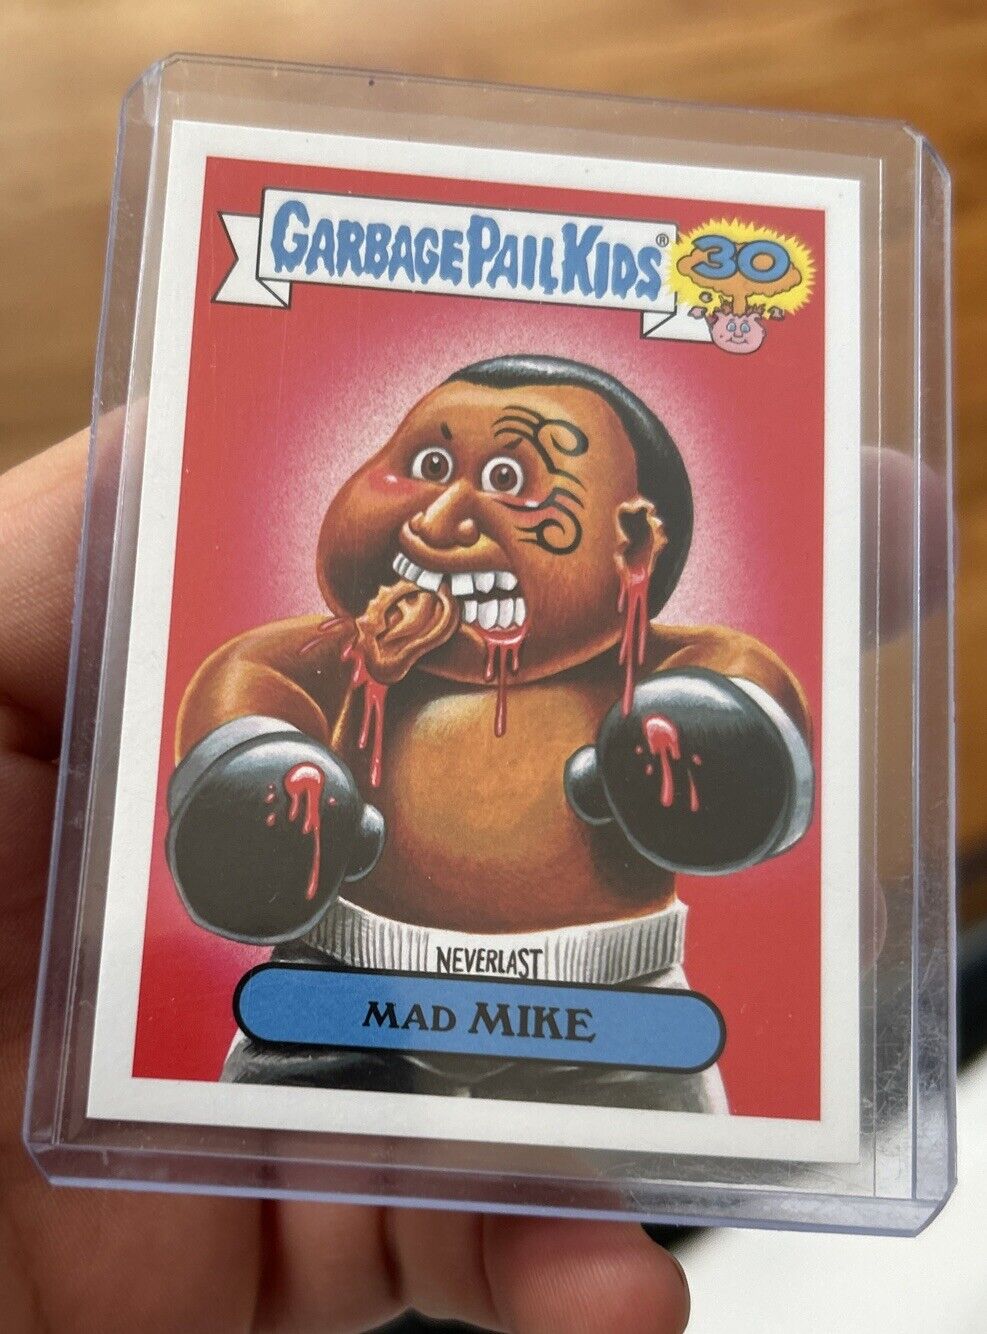 2015 Garbage Pail Kids Mad Mike (Mike Tyson Parody)- GPK 24a Topps Card Qty Rare